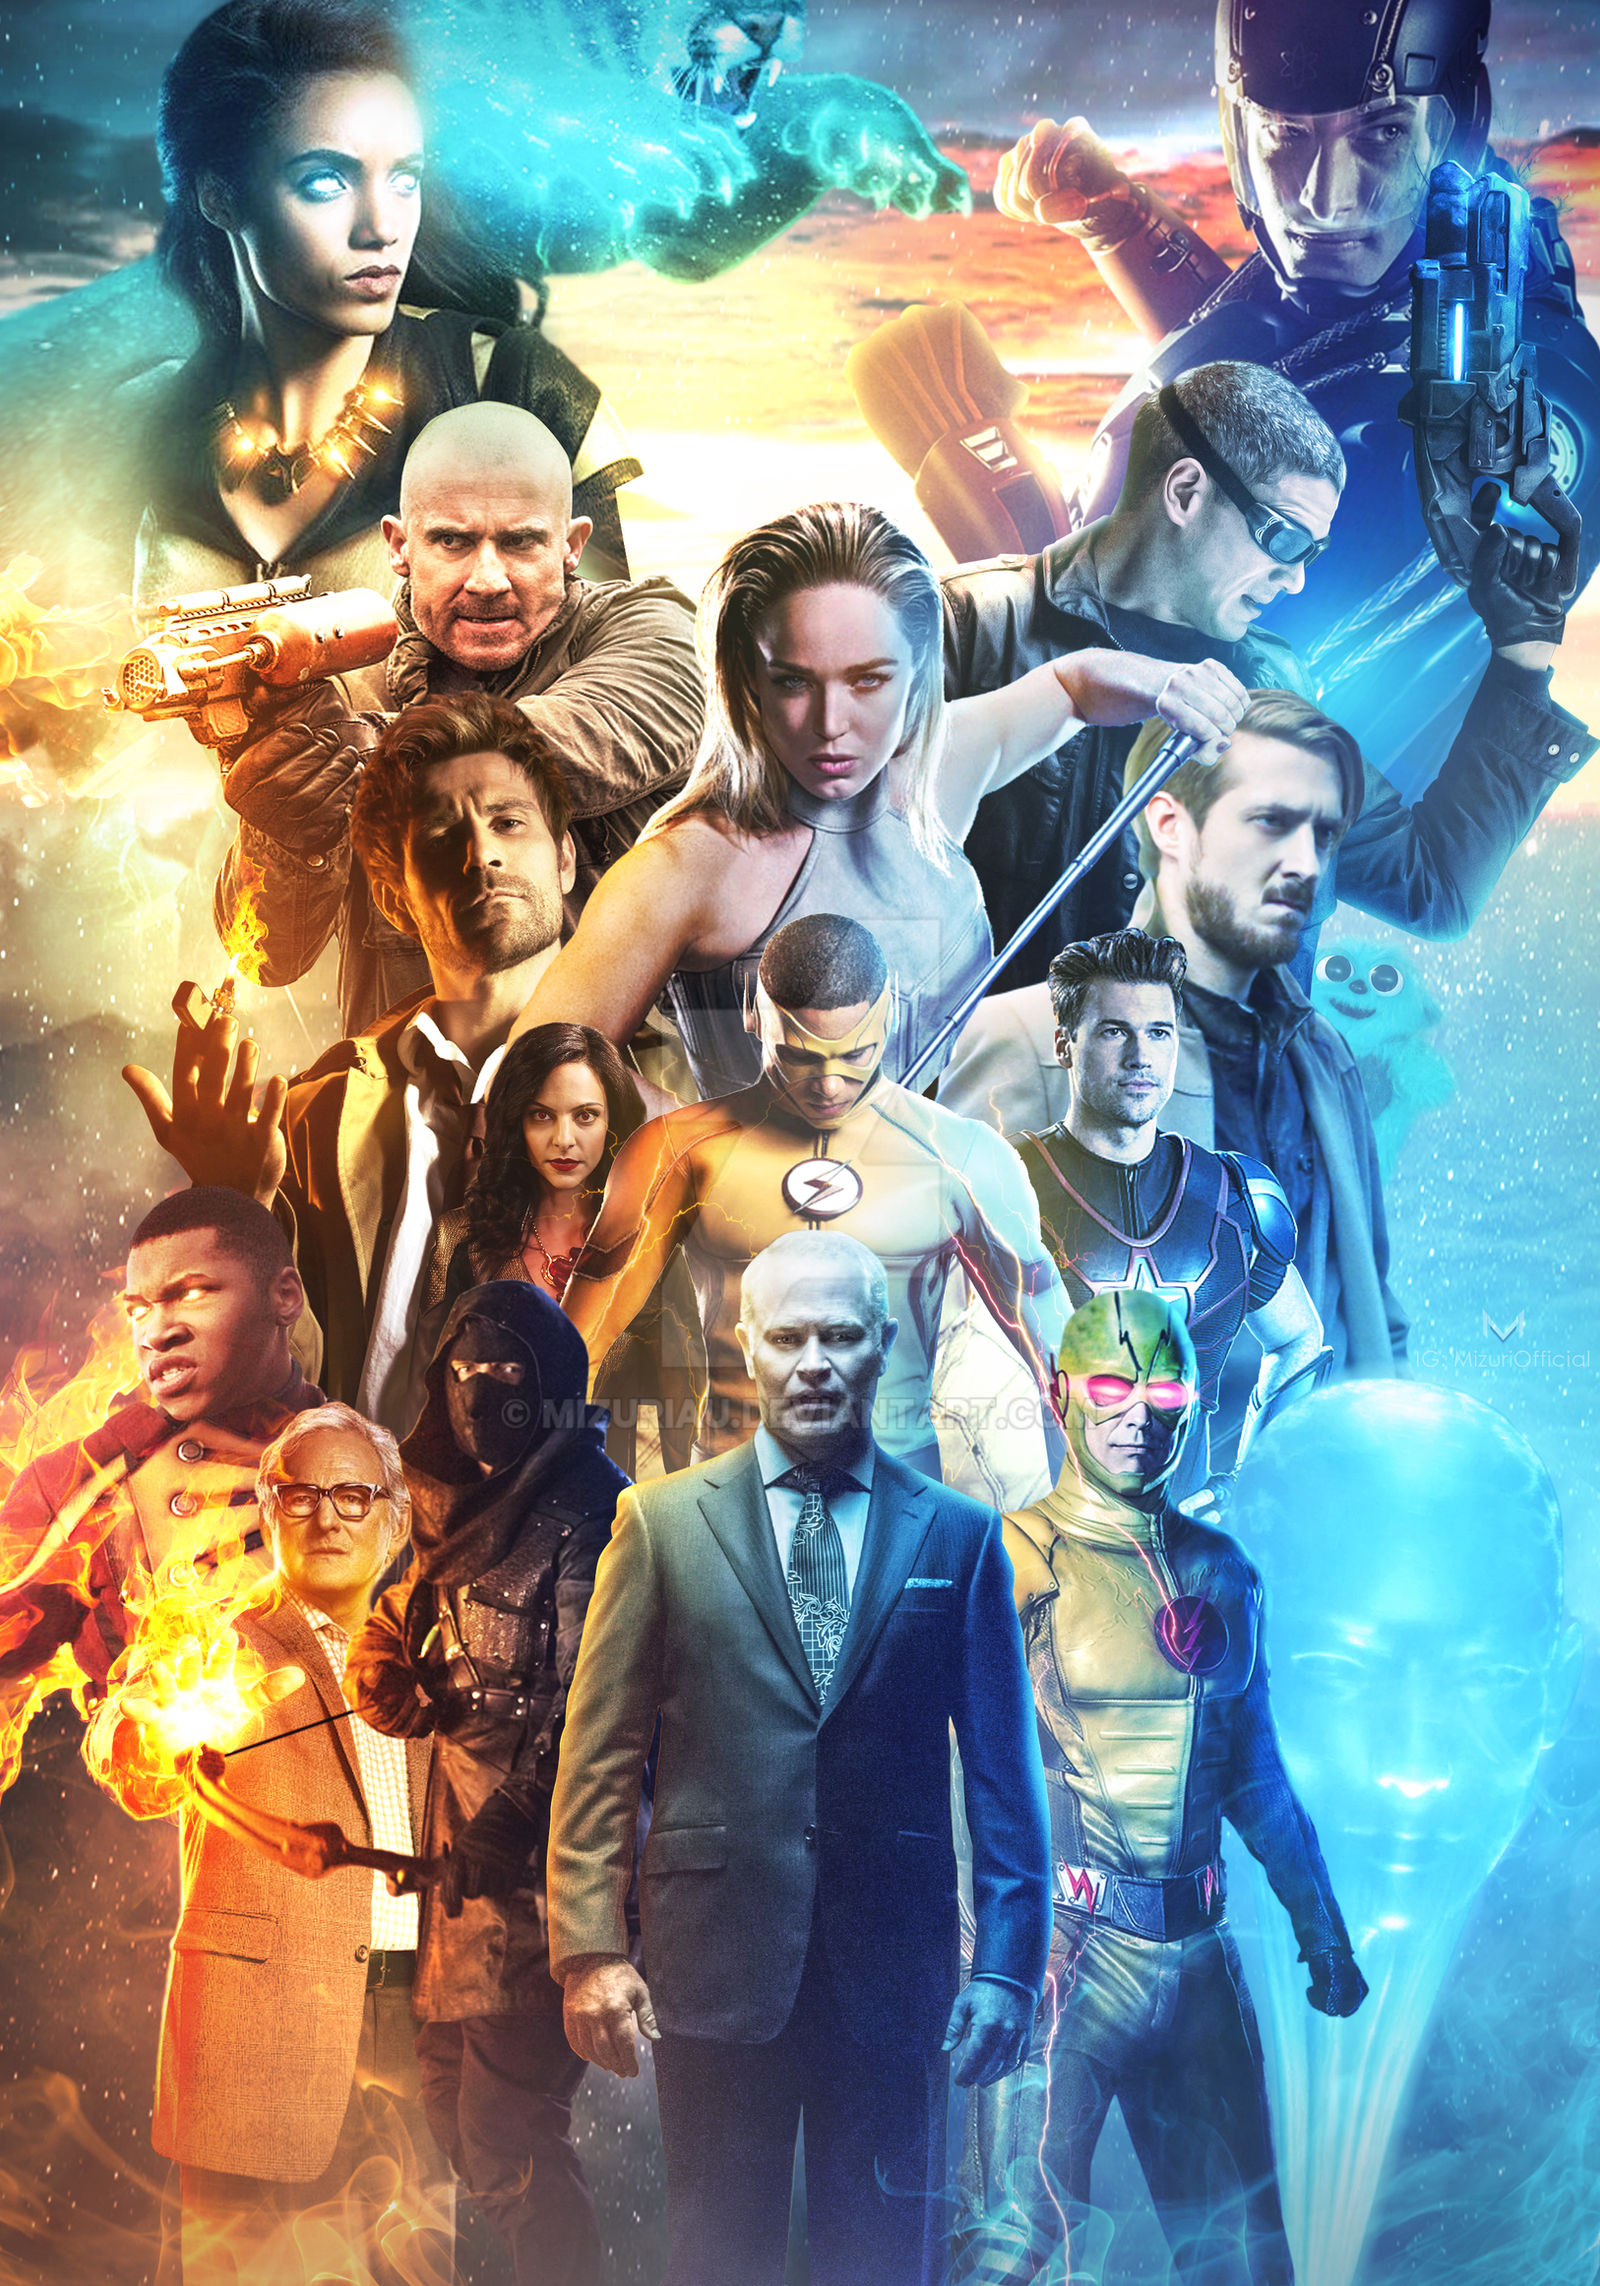 Dc'S Legends Of Tomorrow Wallpapers